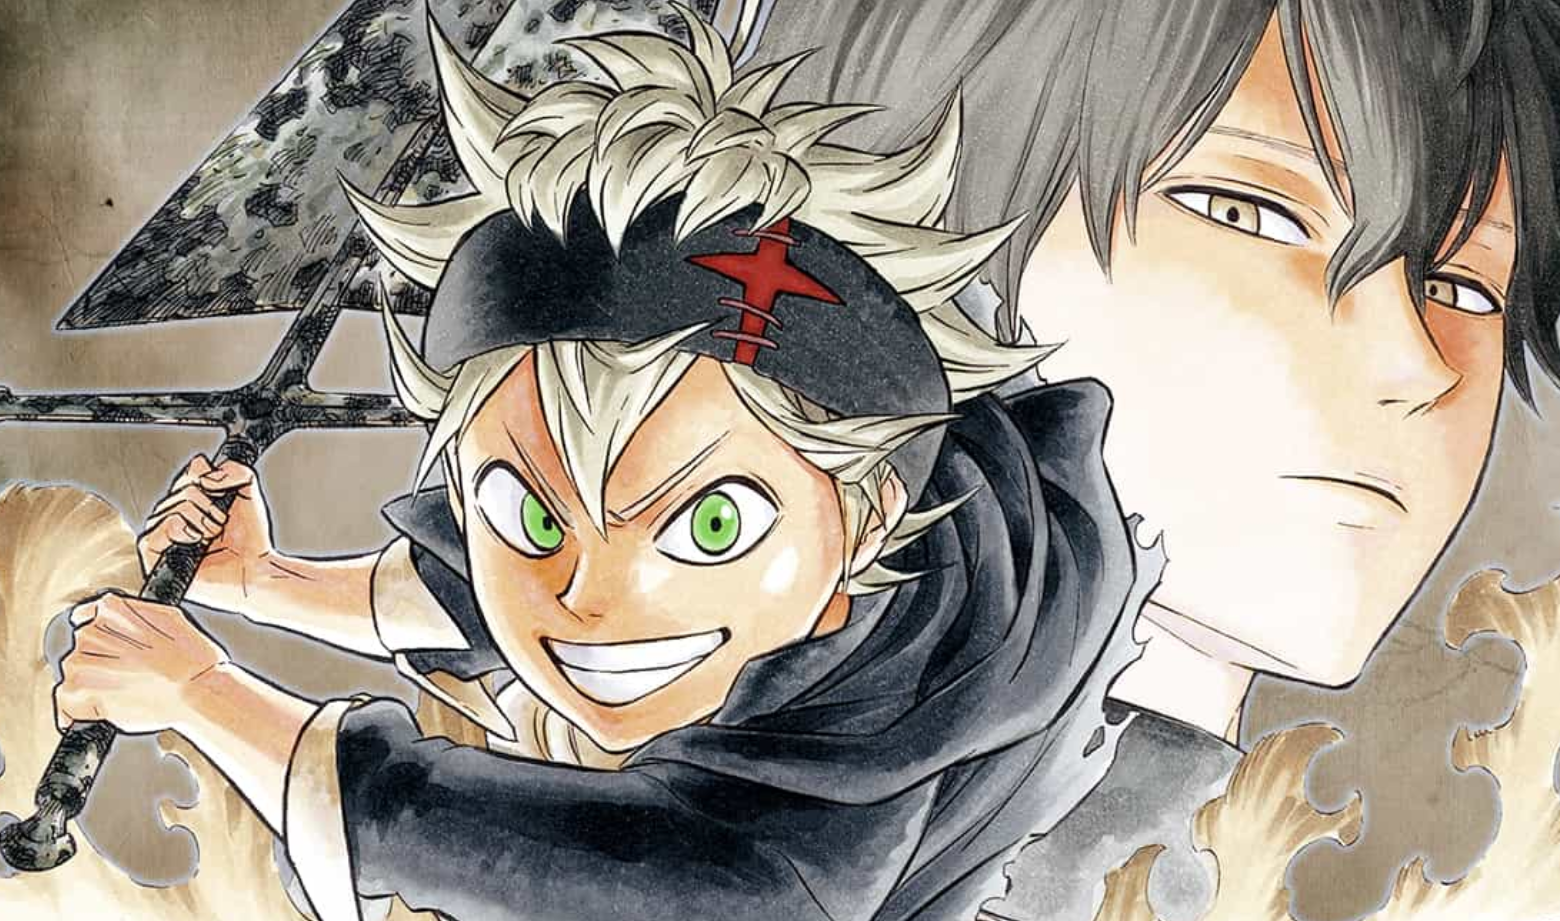 Black Clover Chapter 240 Release Date Delay, Raw Scans and Read Online